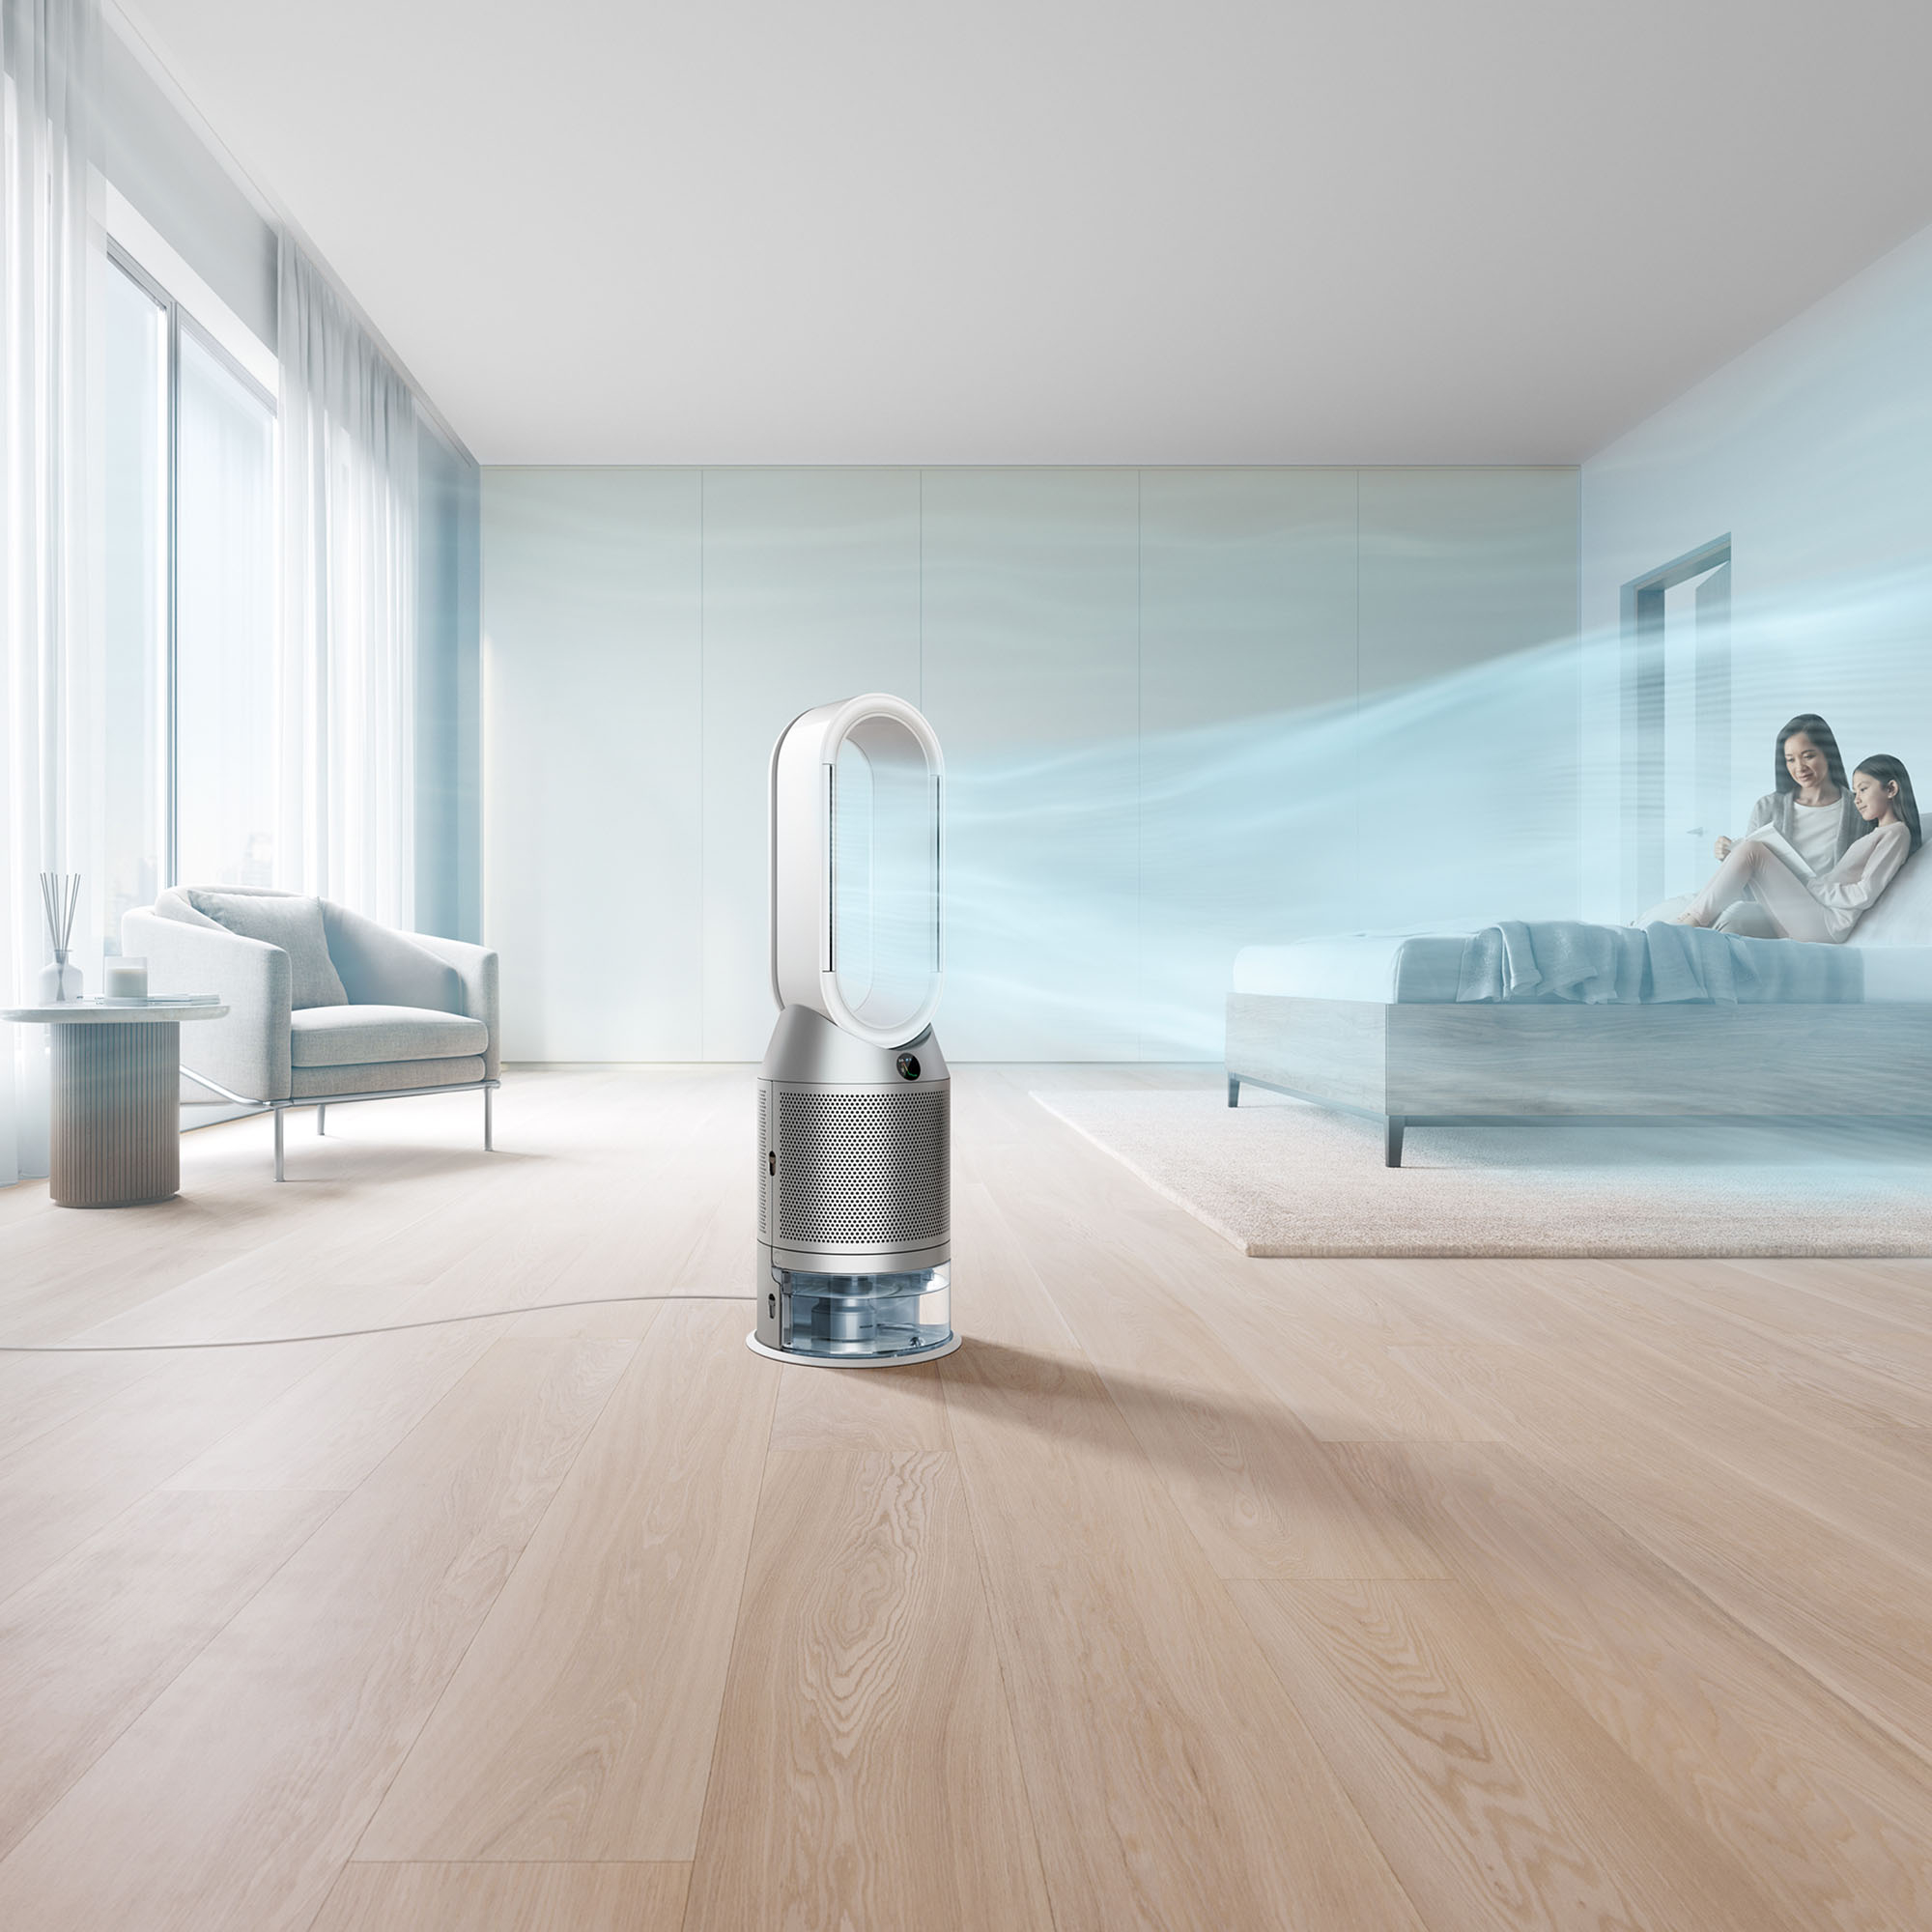 Dyson Purifier Humidify + Cool PH03 White/Silver 369169-01 - Best Buy